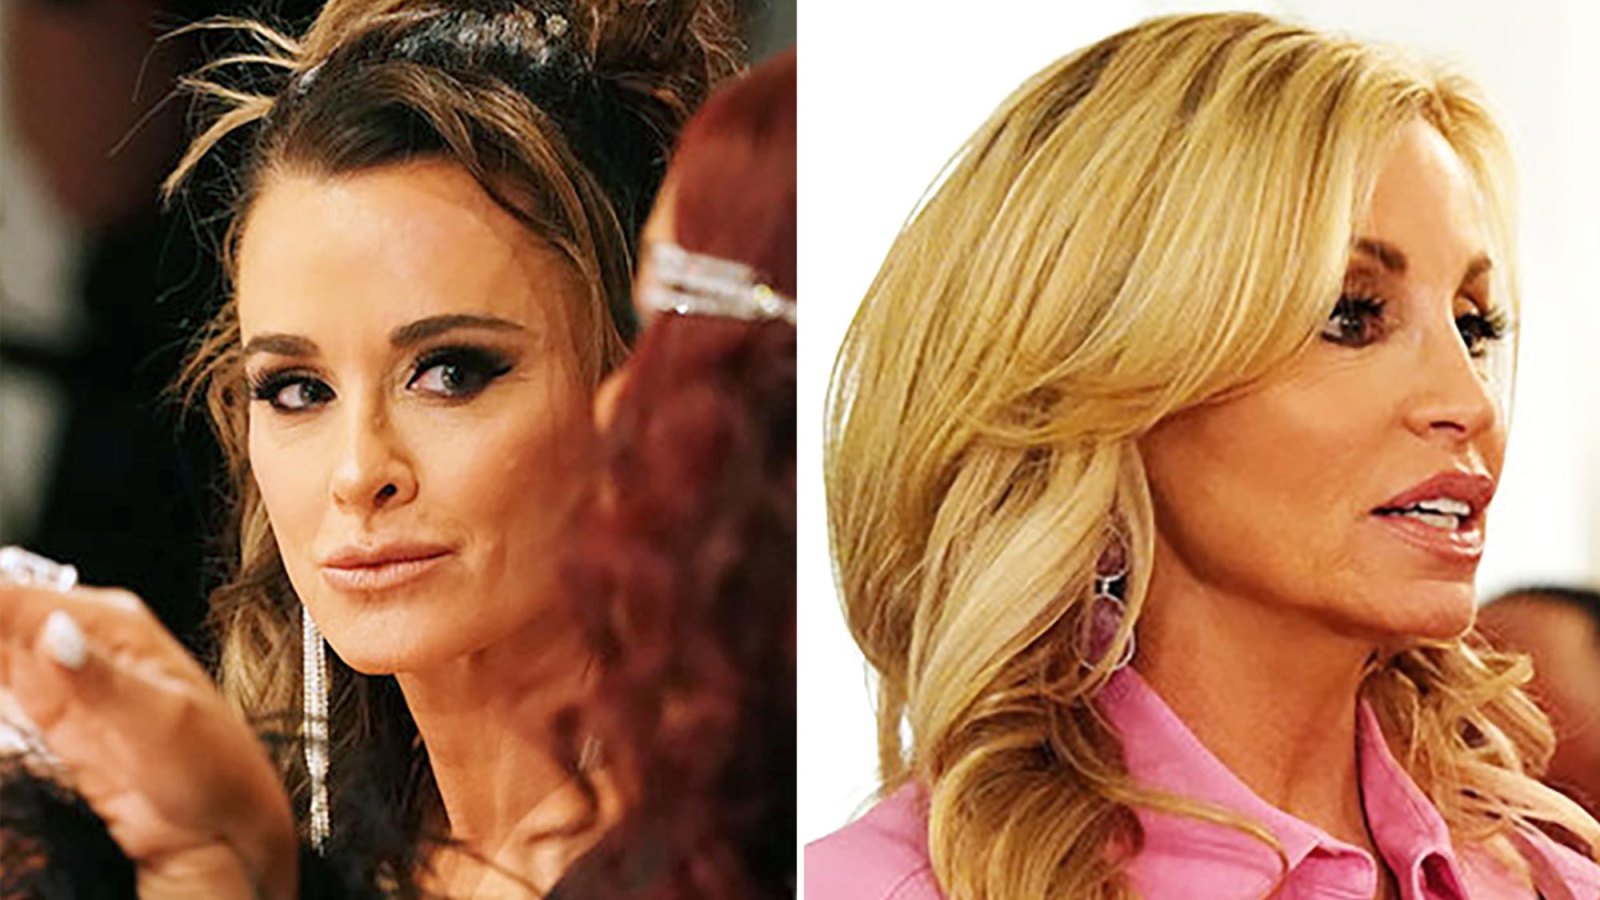 Kyle Richards Hosts RHOBHs 2nd Dinner Party From Hell Complete With Camille Grammer and Faye Resnick